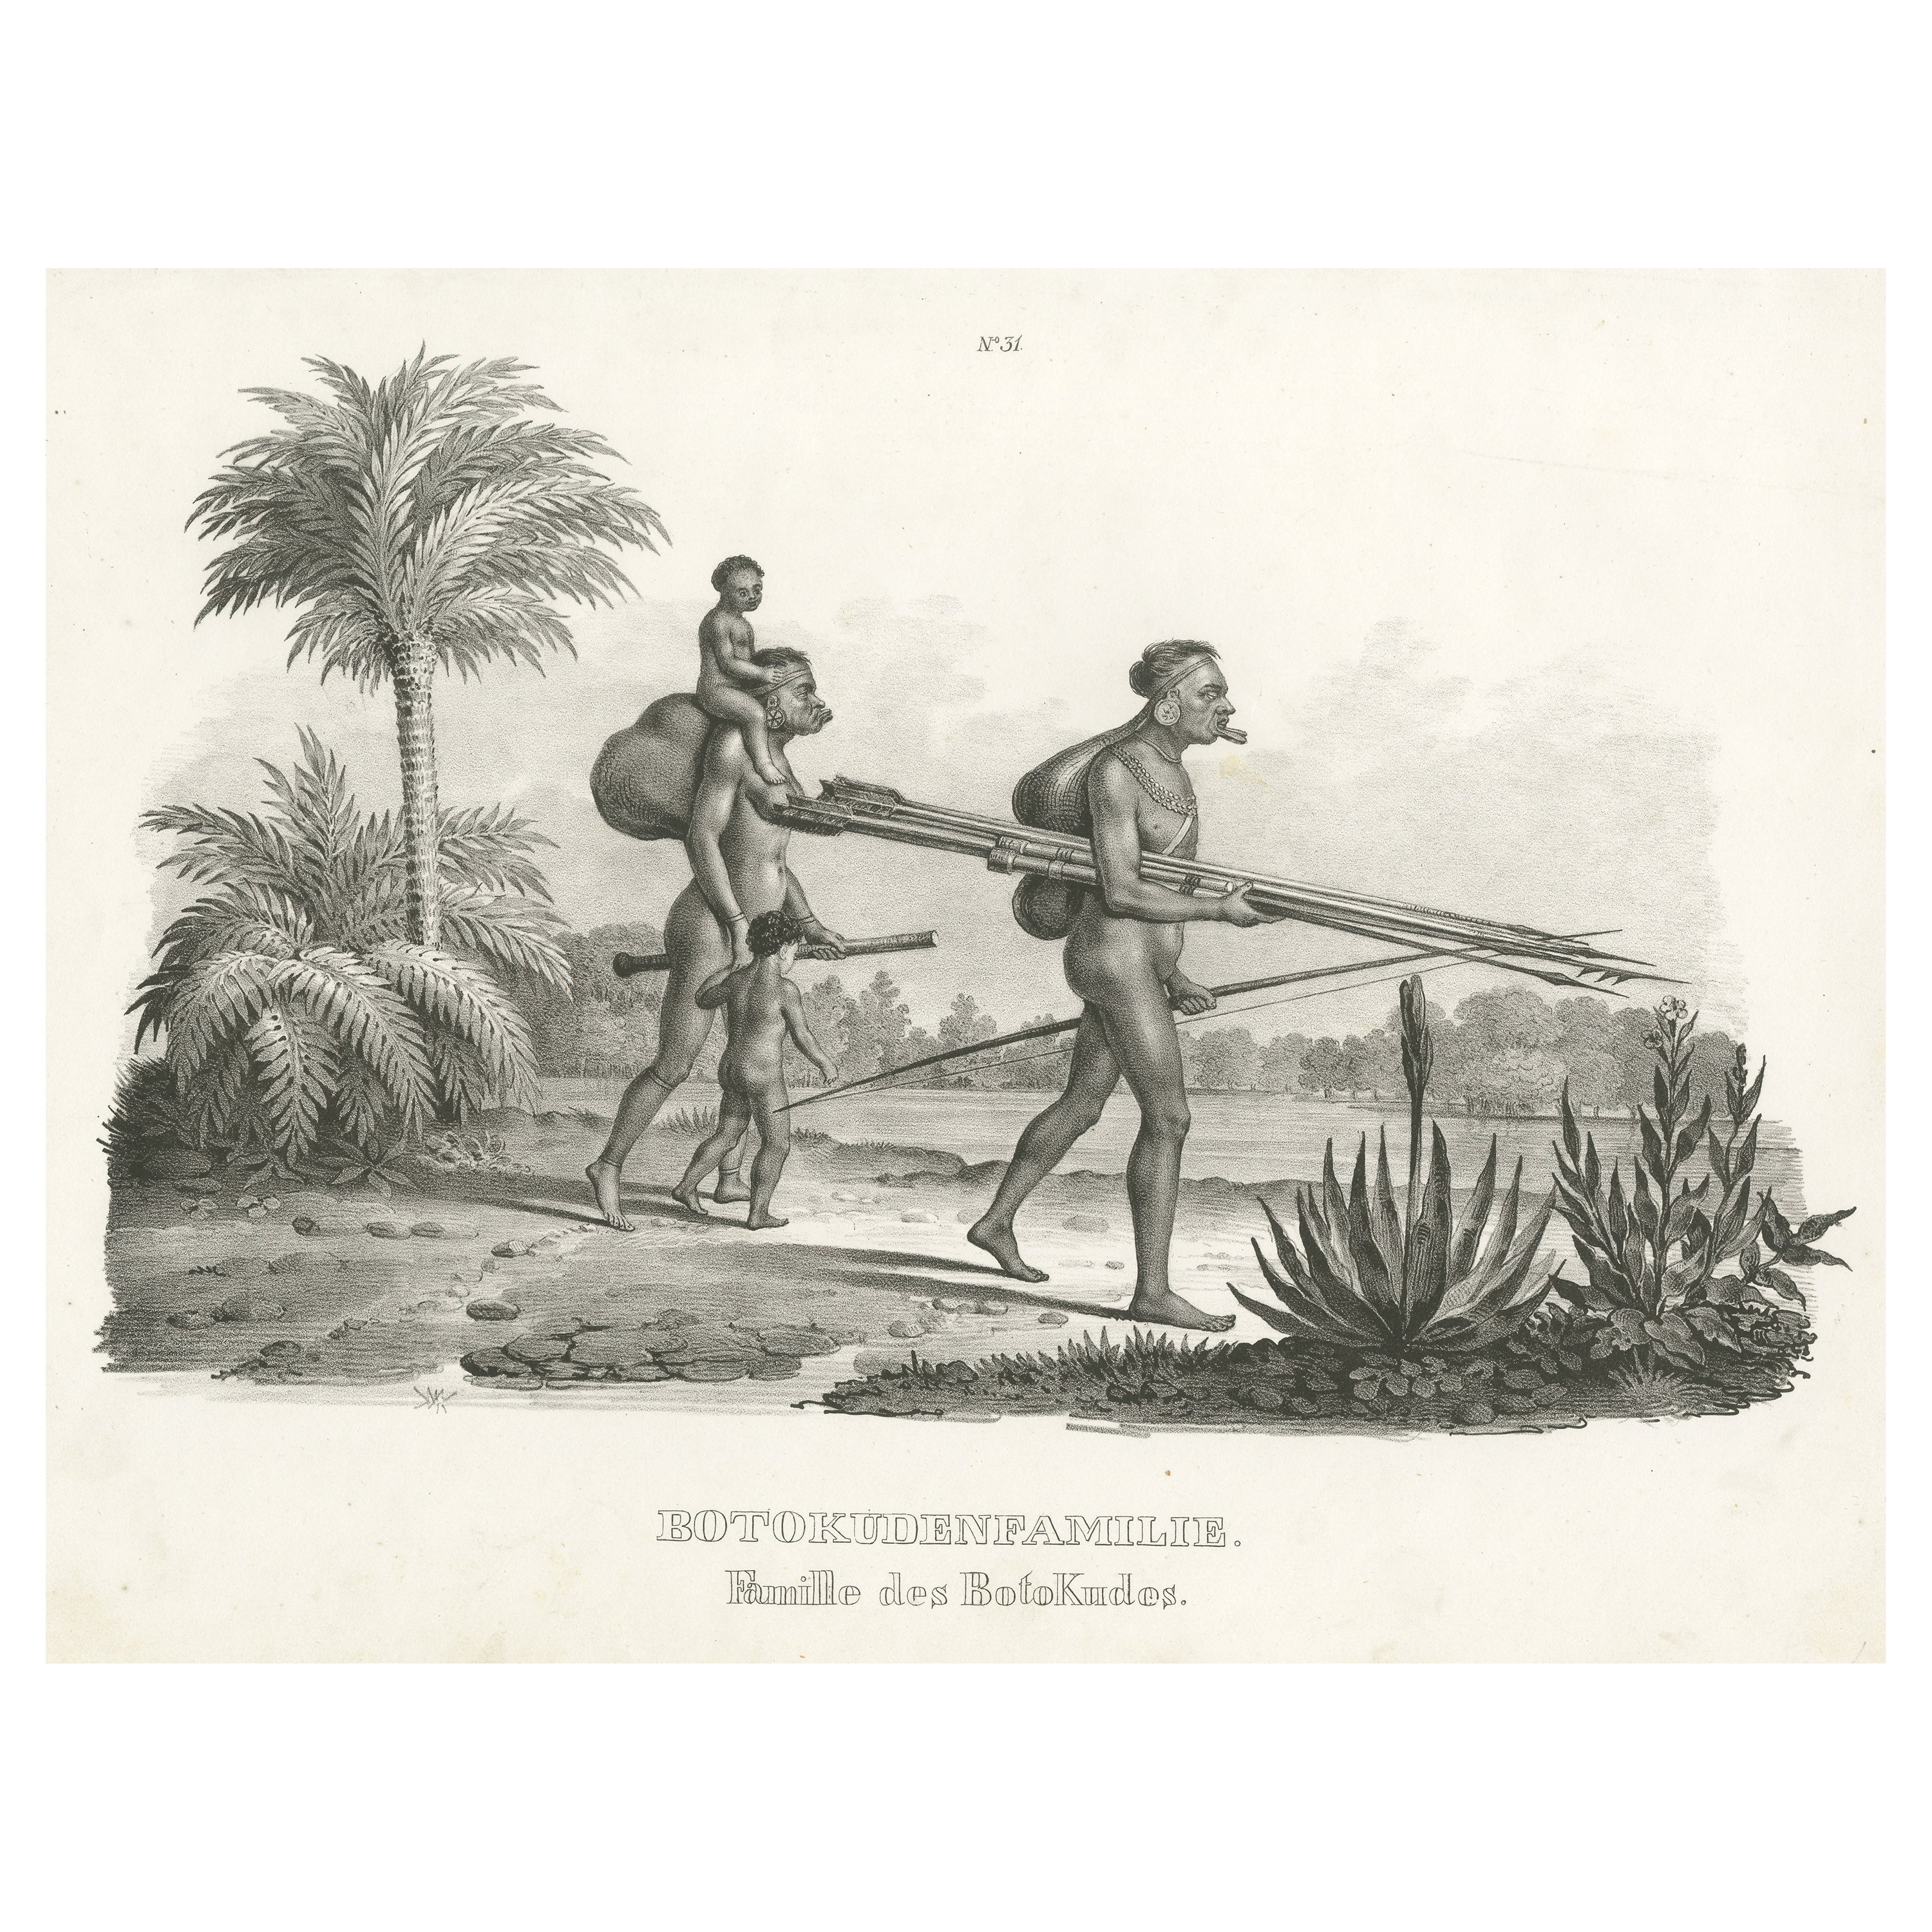 Antique Steel Engraved Print Showing Botocudo, South American Indian People For Sale